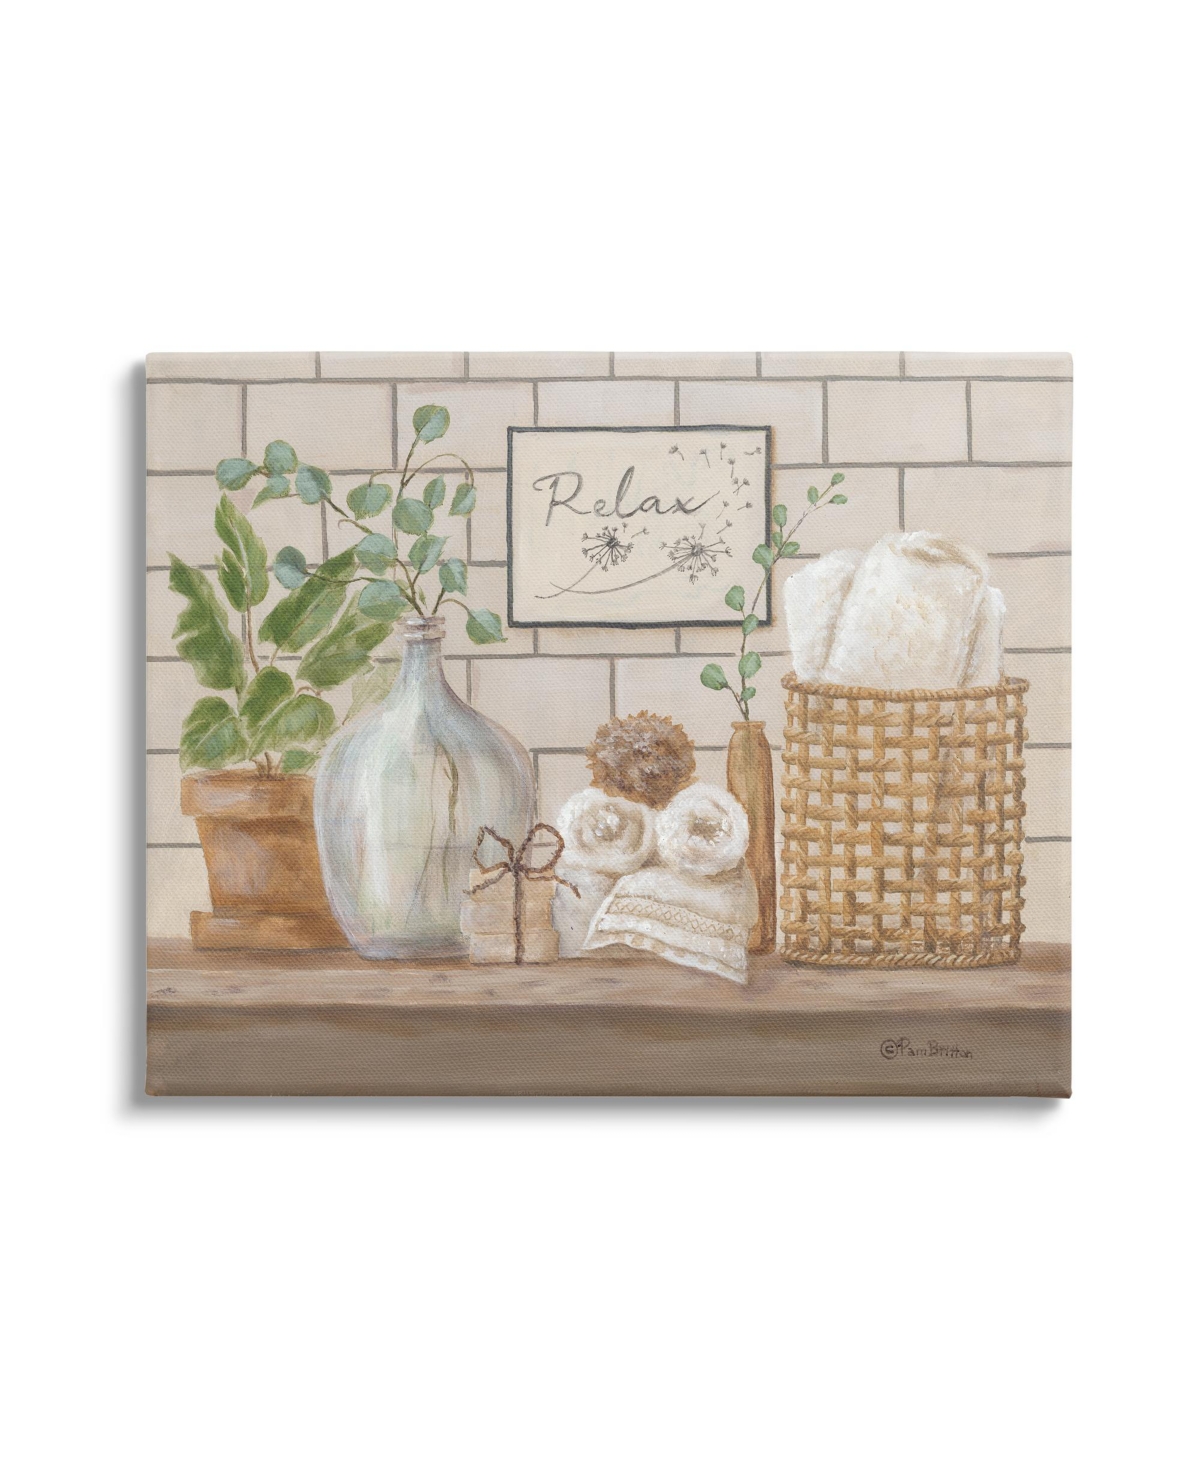 Stupell Industries Relax Uplifting Bathroom Scene Canvas Wall Art, 16" X 1.5" X 20" In Multi-color